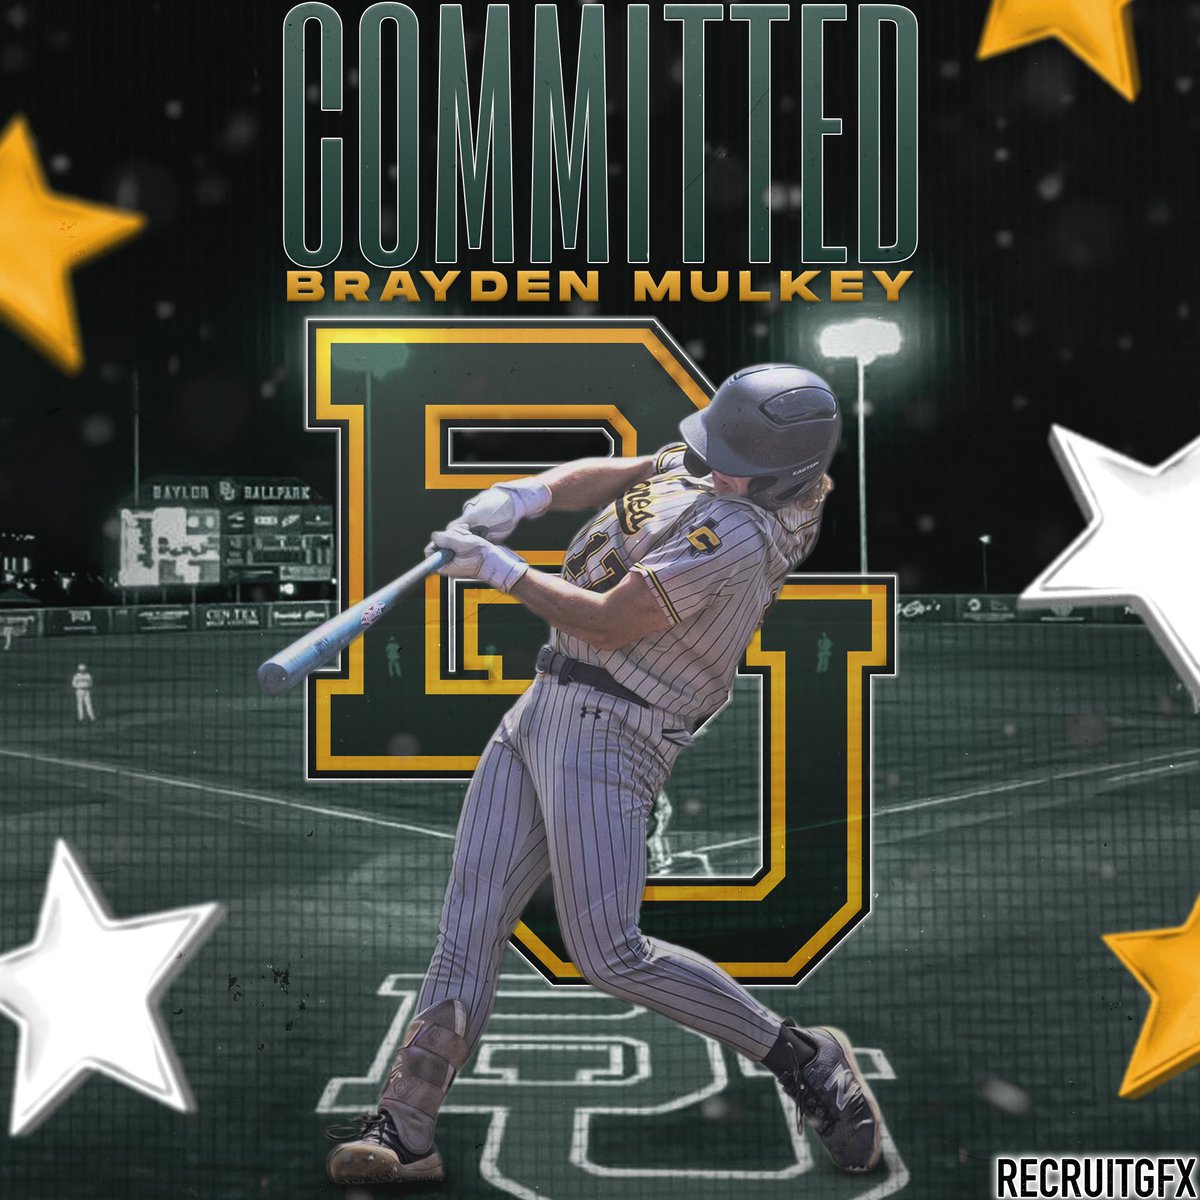 Blessed to announce that I will be continuing my academic & athletic career at Baylor University! Thanks to God for all that he has blessed me with. Thank you to my family, friends & coaches for supporting & helping me along this journey. @BsblDavenport @MThompy25 @CoachDillon21